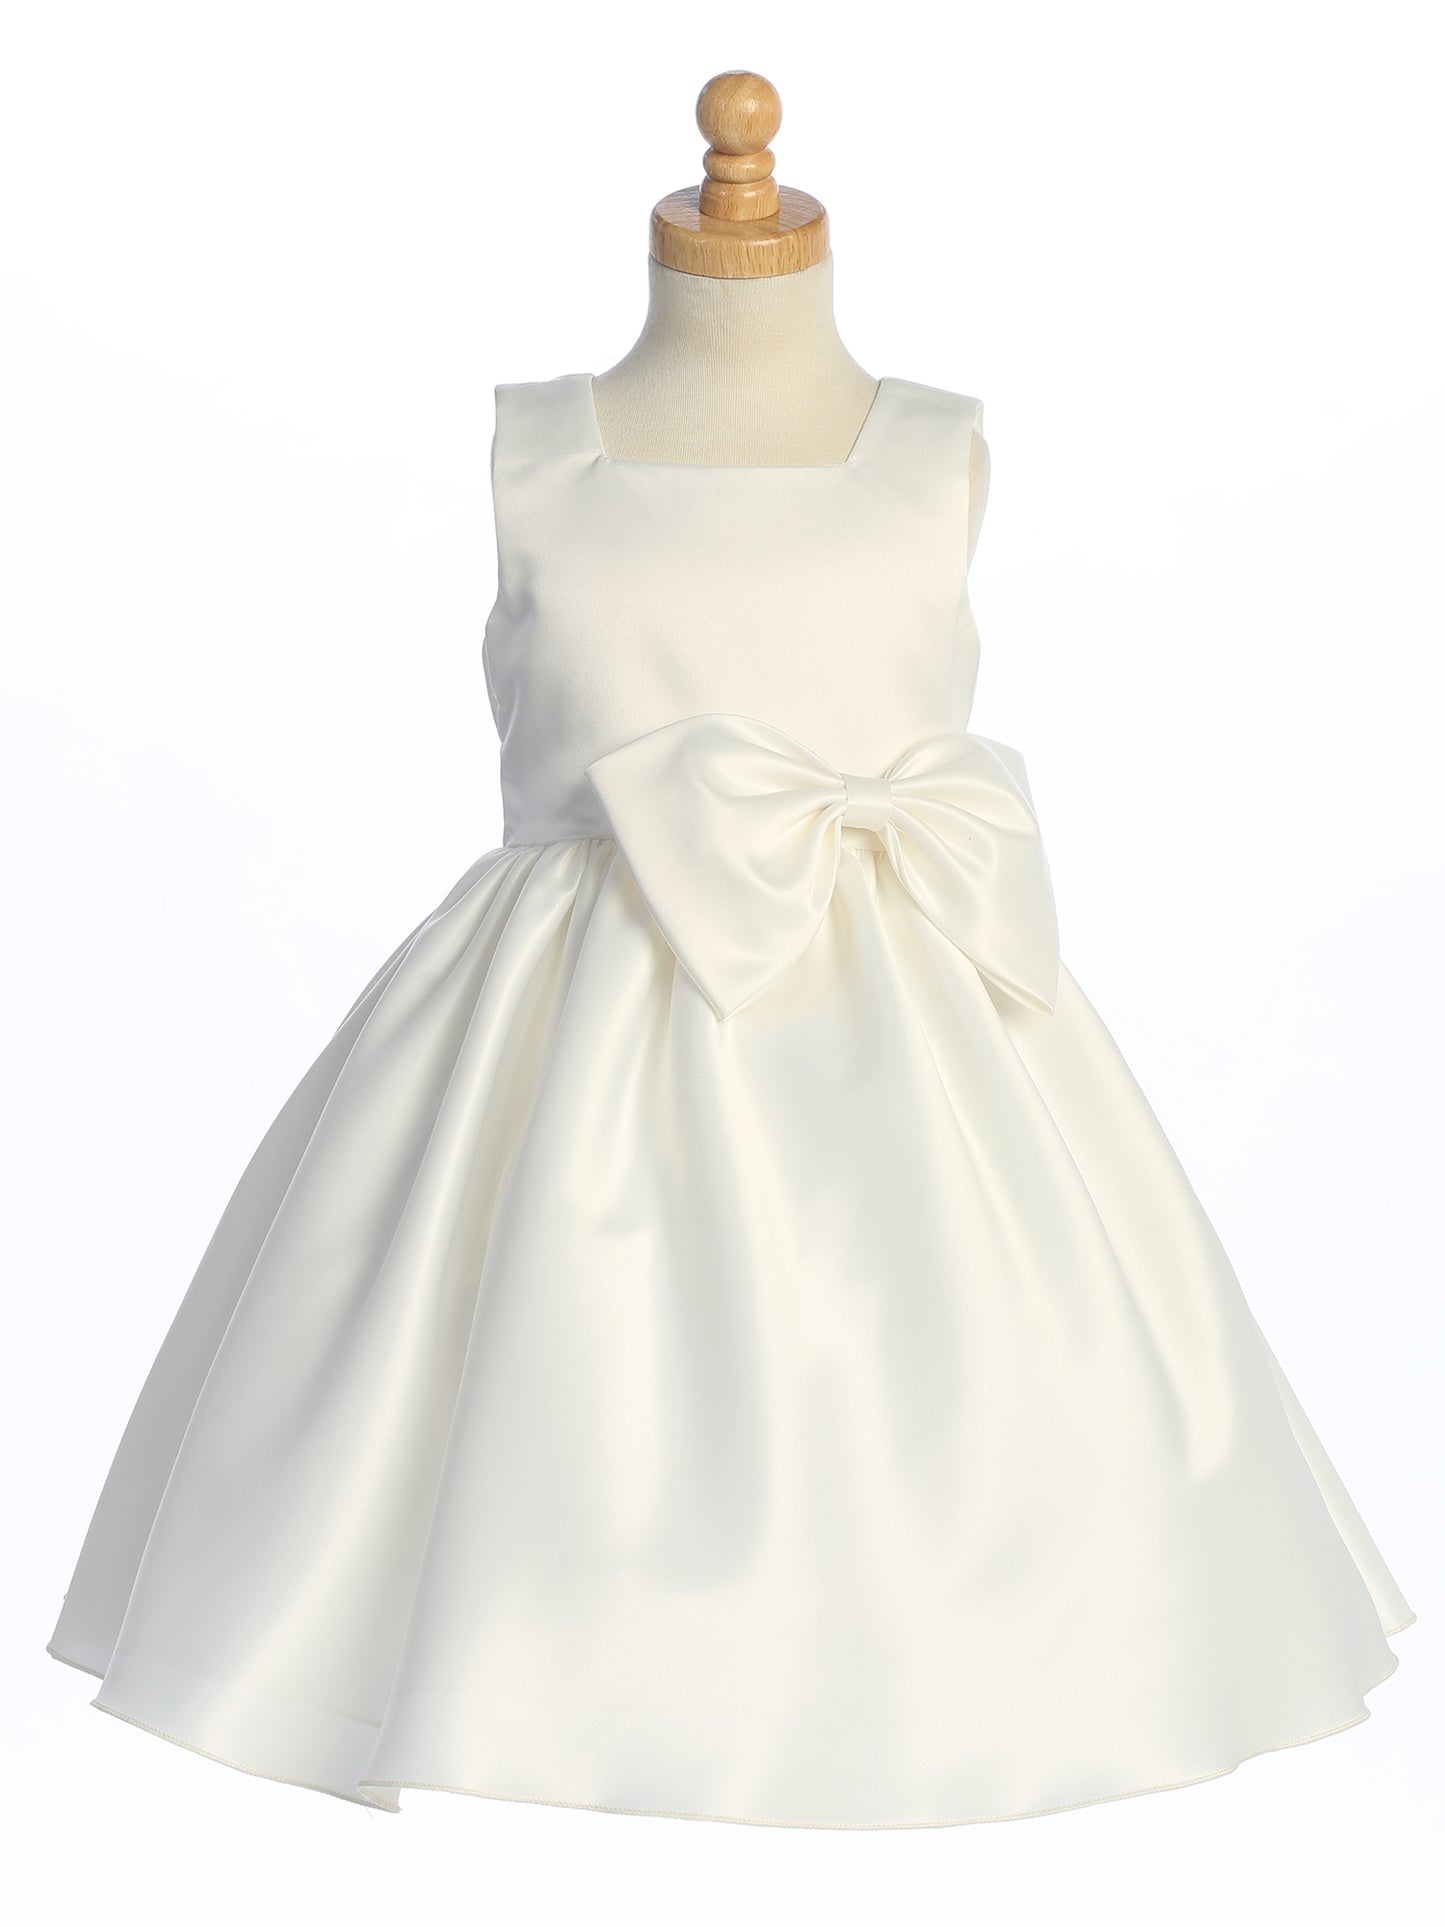 Satin Flower Girl Dress with Bow - Ivory - BL257-IVO